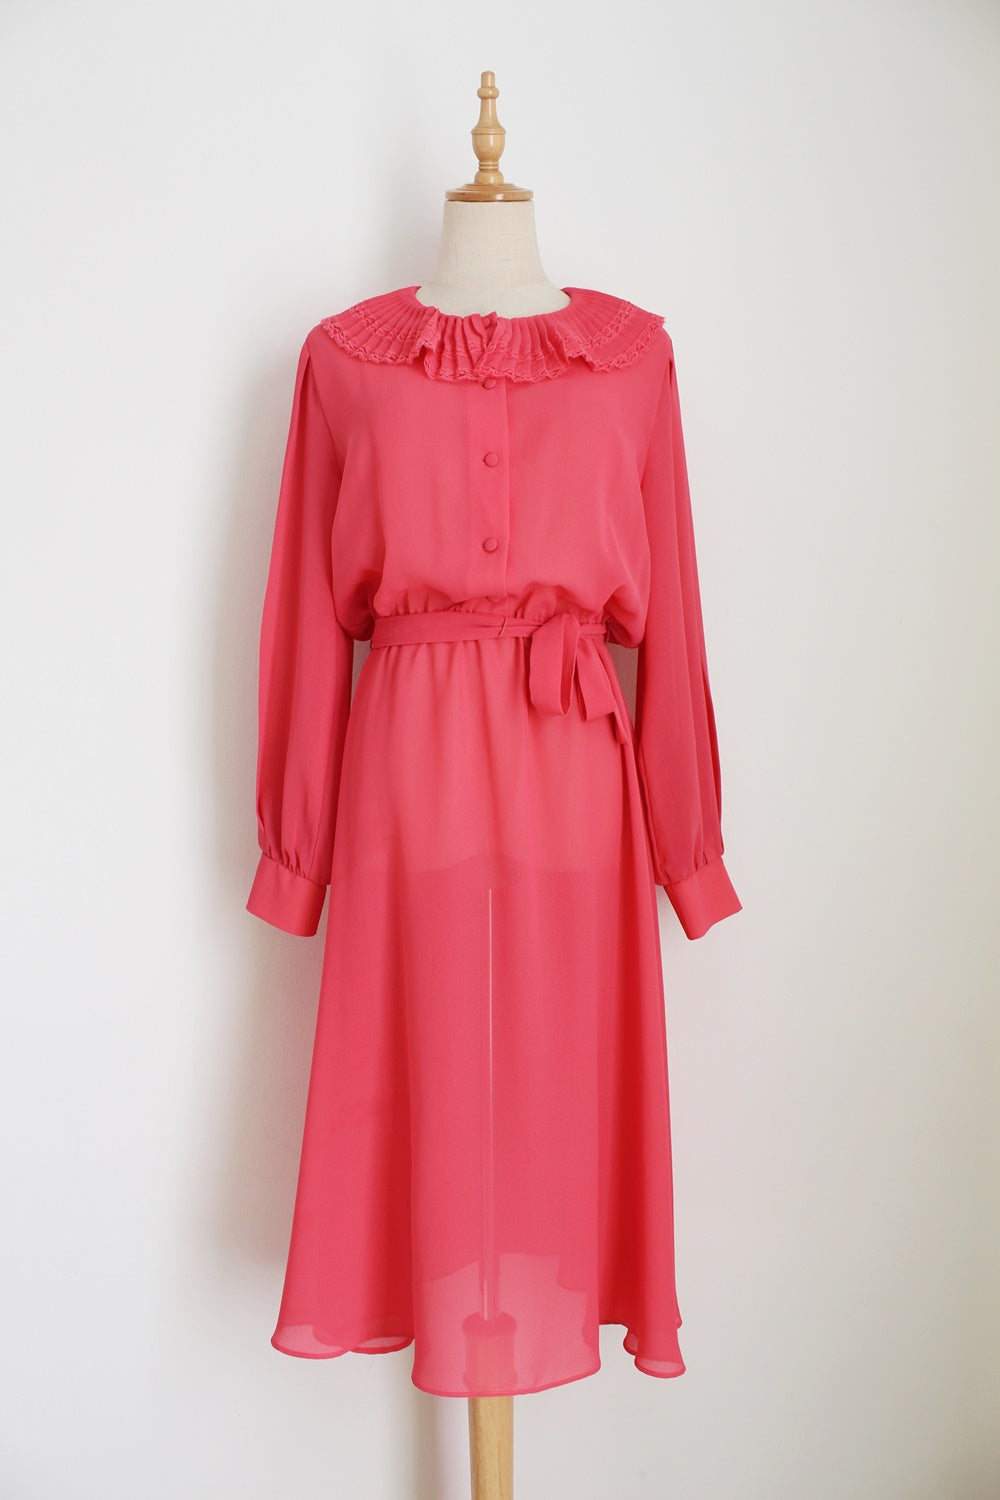 VINTAGE PLEATED COLLAR DRESS CORAL - SIZE 8